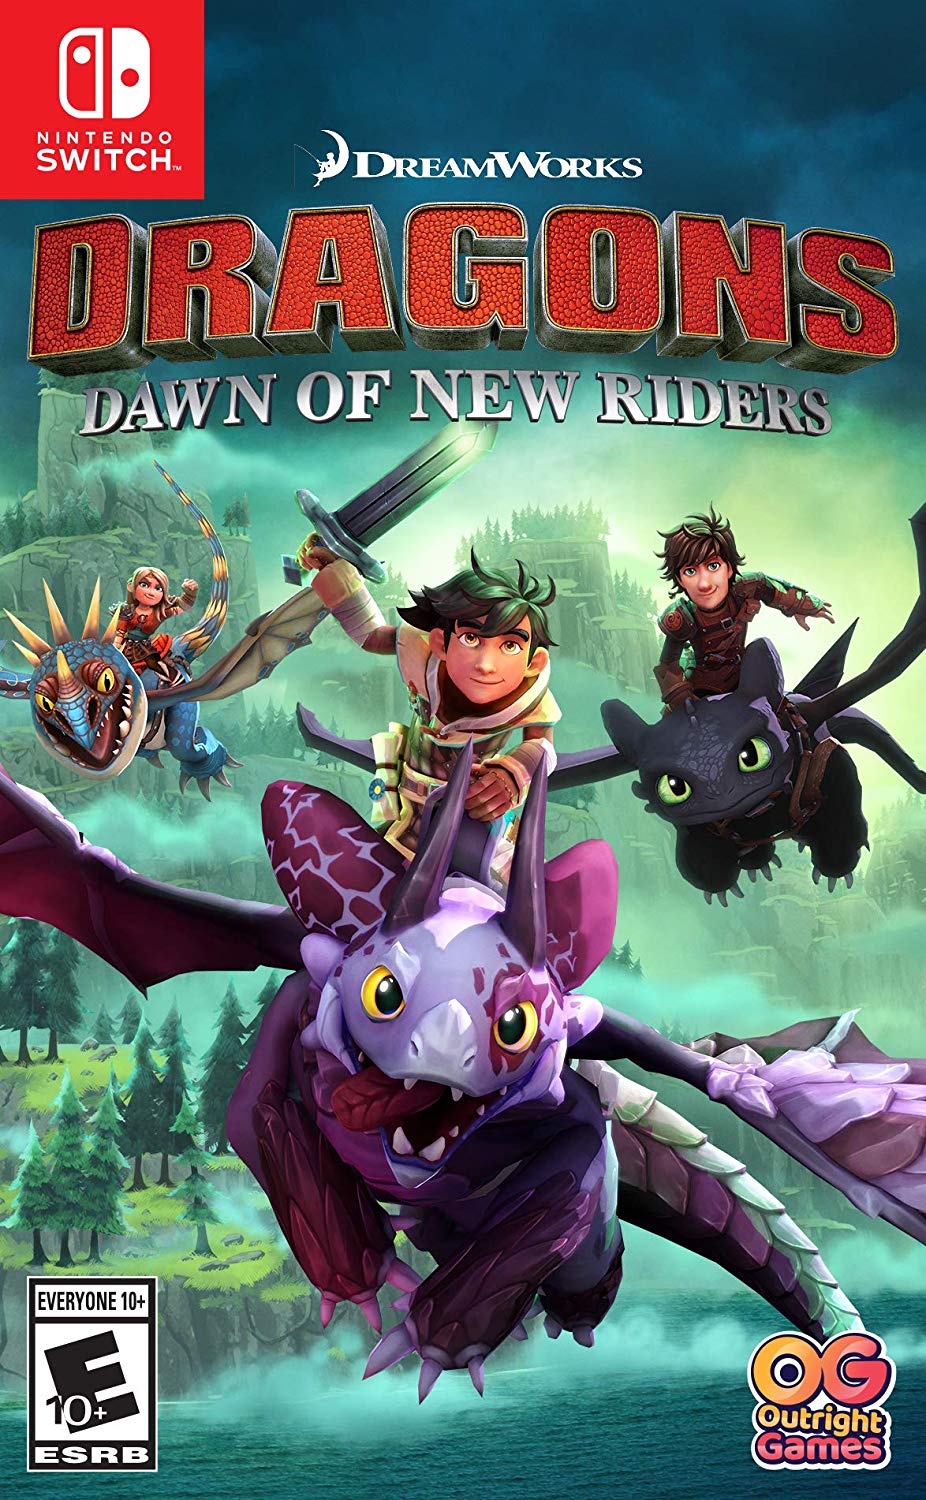 DreamWorks Dragons Dawn of New Riders - (NSW) Nintendo Switch Video Games Outright Games   